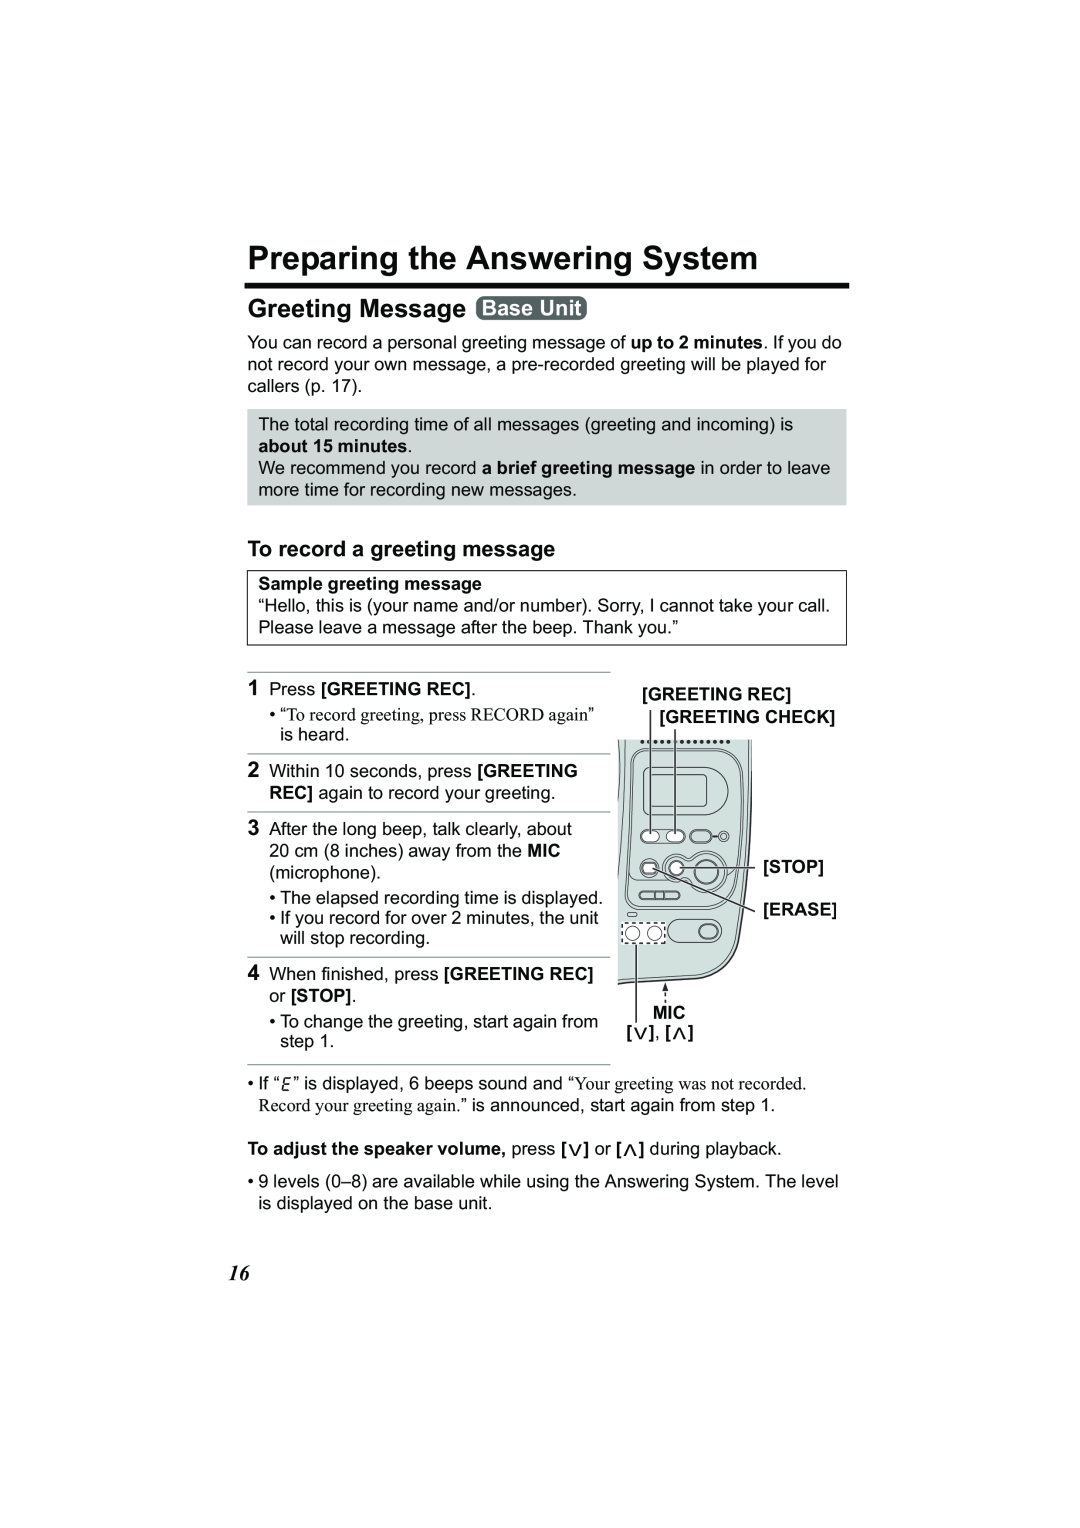 Panasonic Acr14CF.tmp manual Preparing the Answering System, Greeting Message Base Unit, To record a greeting message 